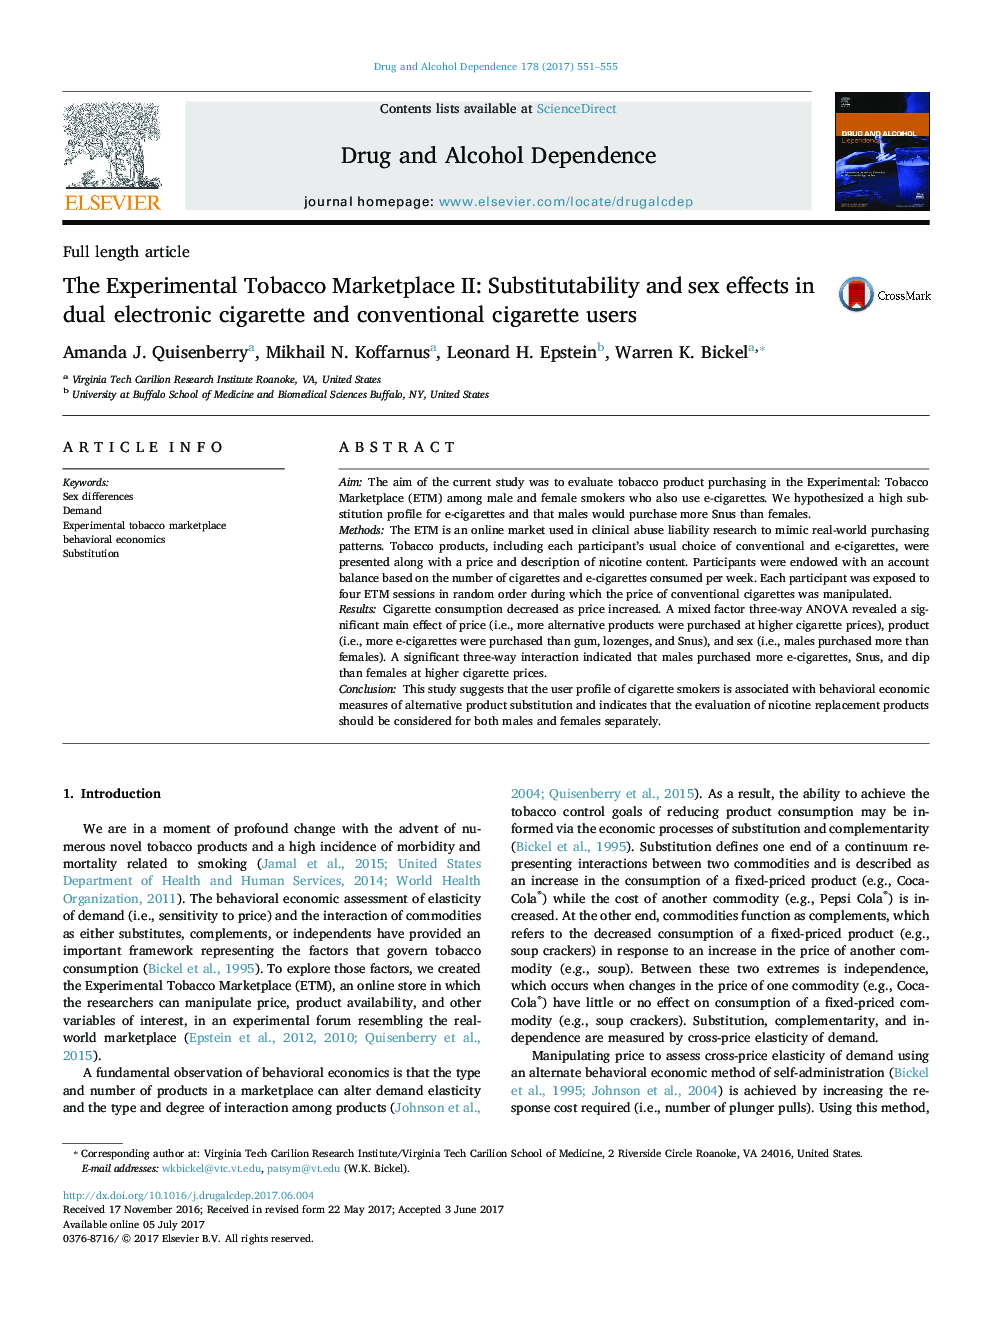 The Experimental Tobacco Marketplace II: Substitutability and sex effects in dual electronic cigarette and conventional cigarette users